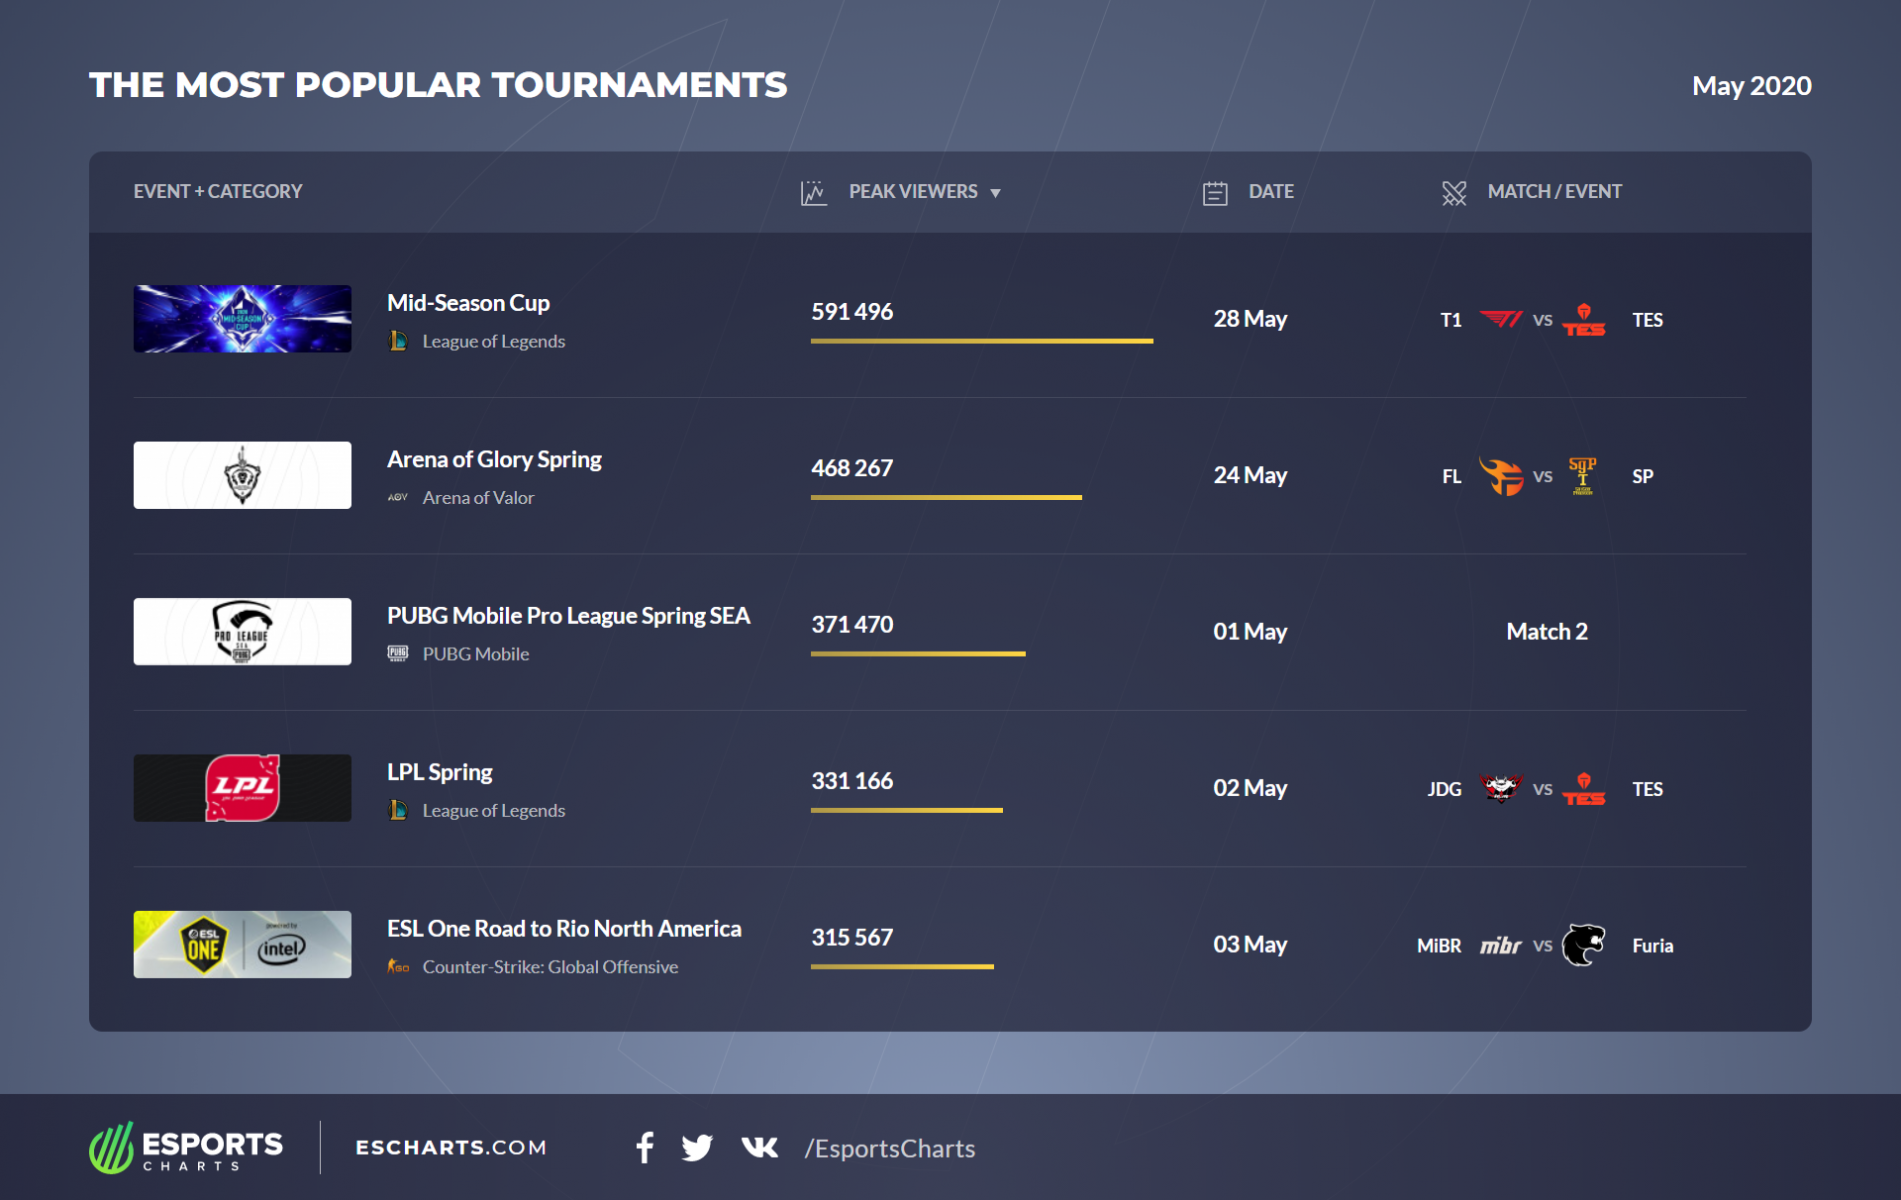 Most Popular Tournaments May 2020